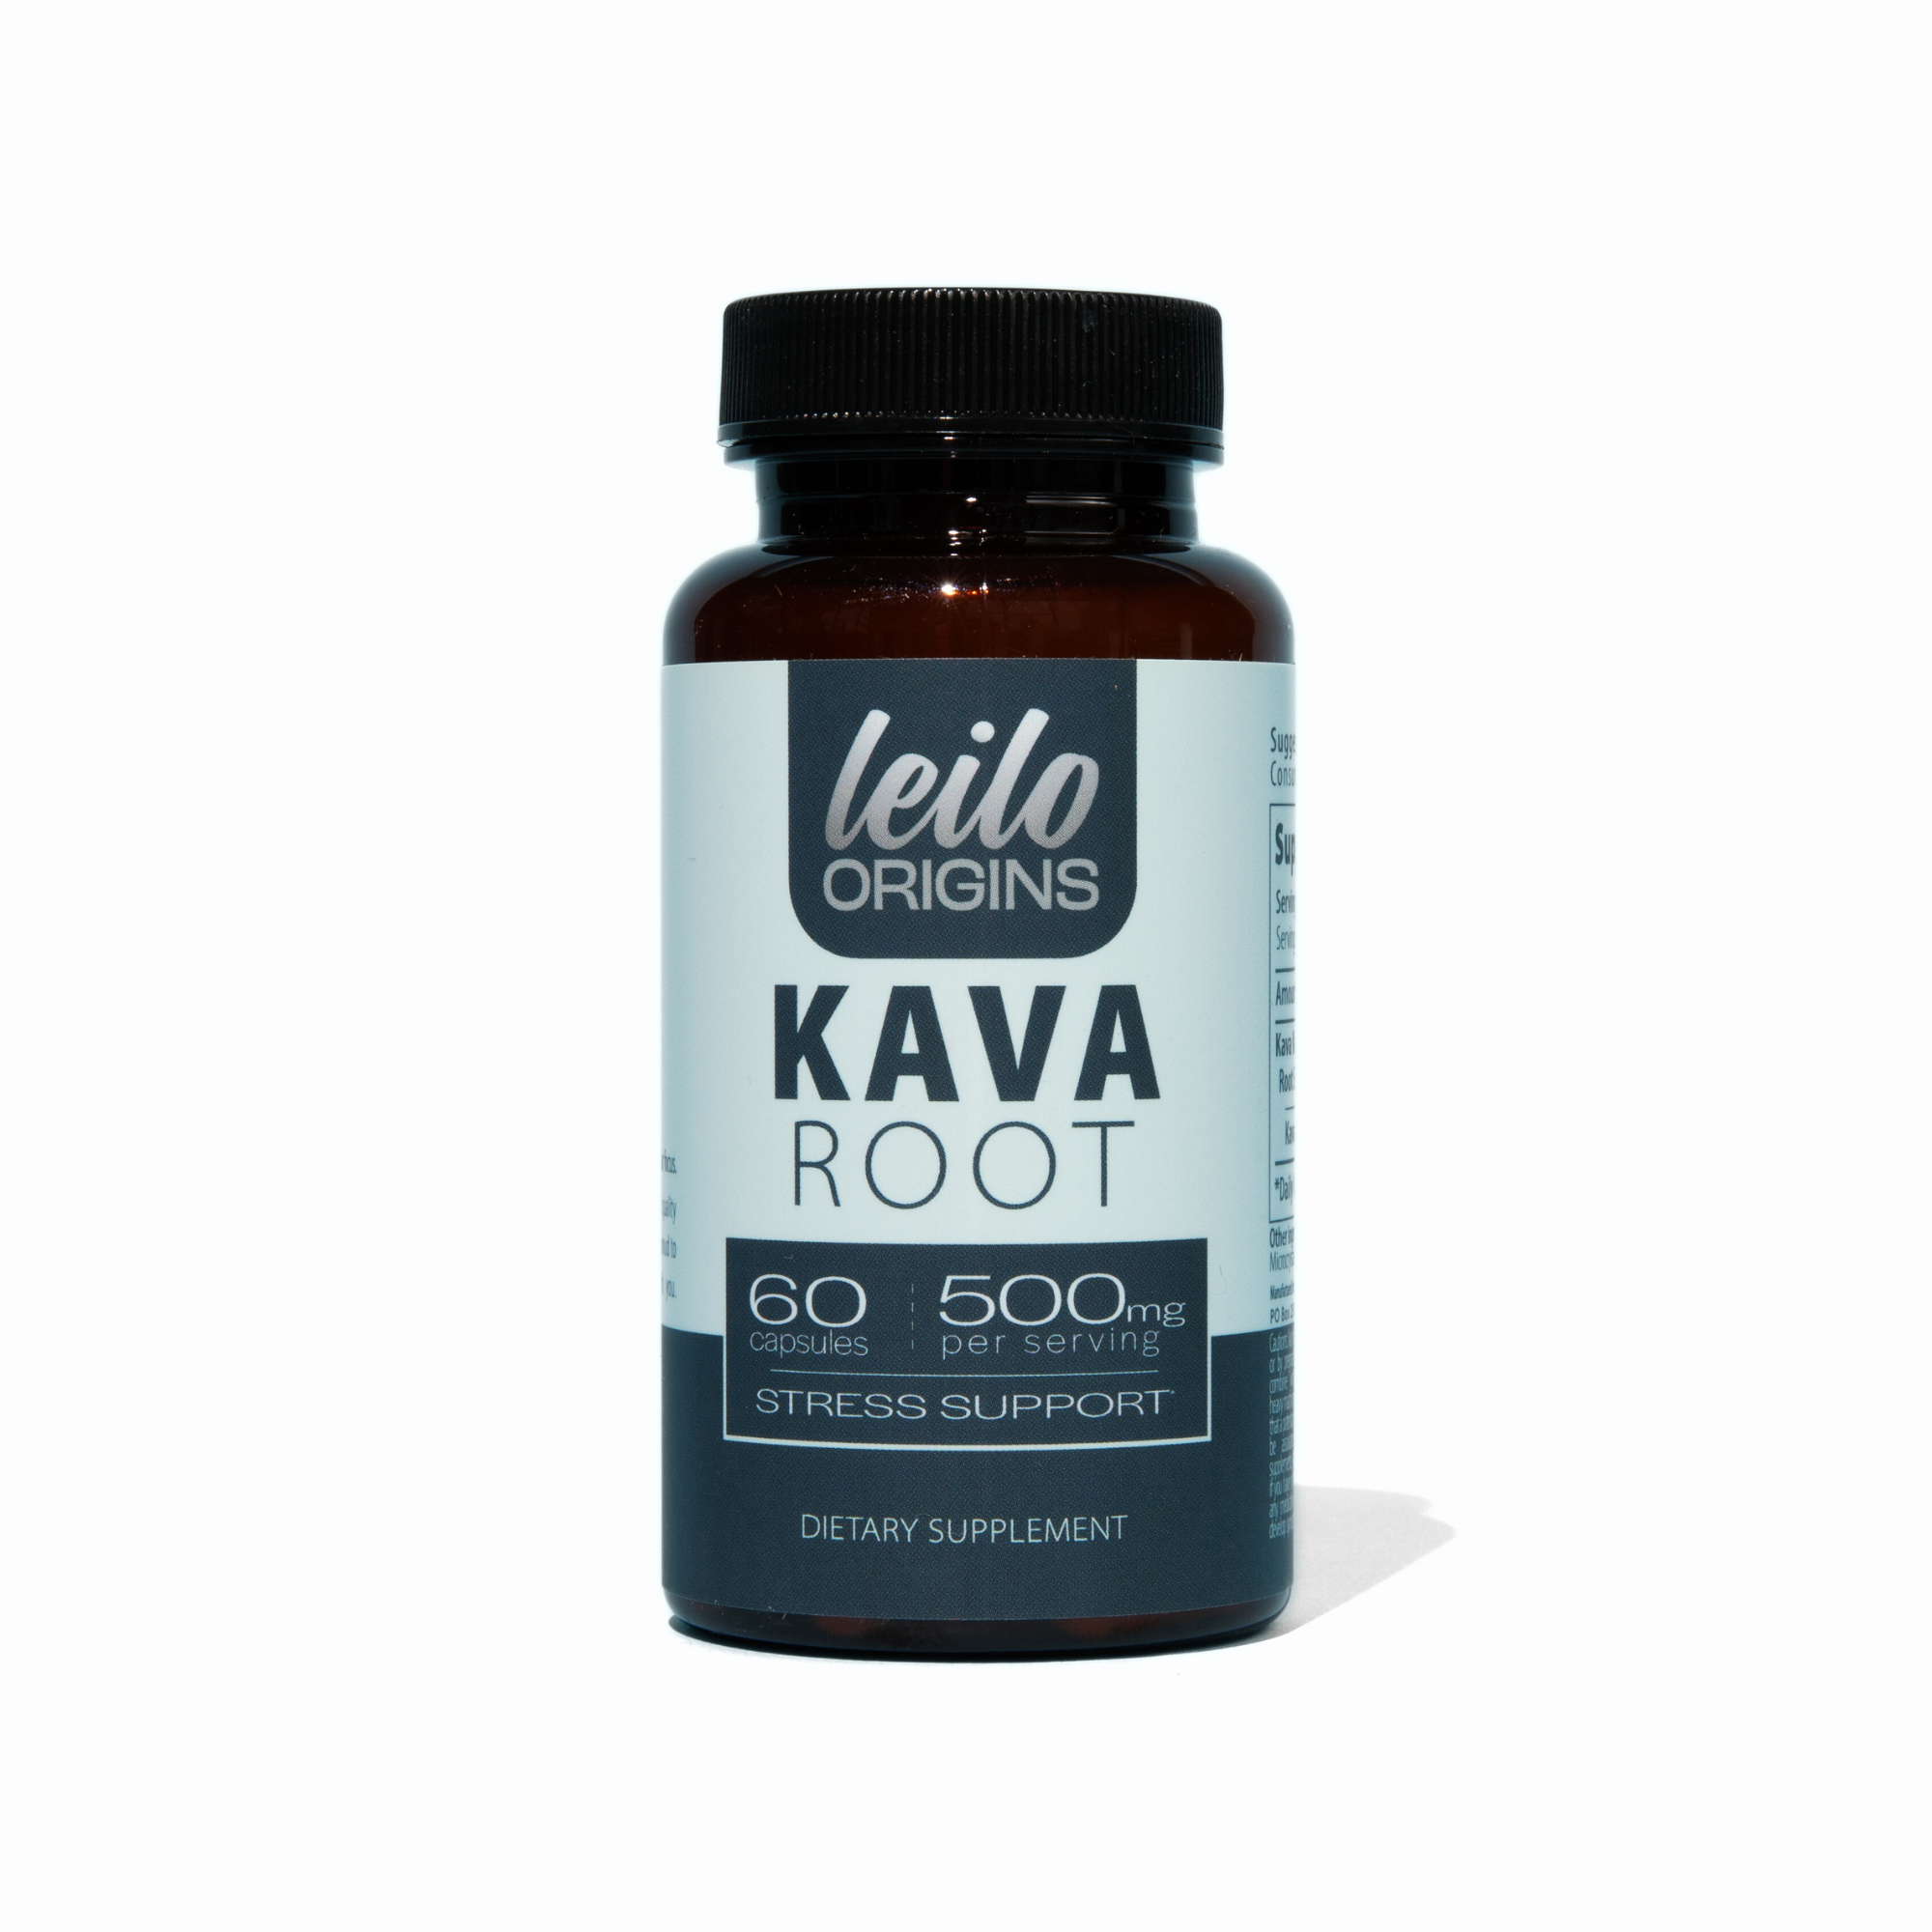 A bottle of Leilo Origins Kava Root dietary supplement for stress support.